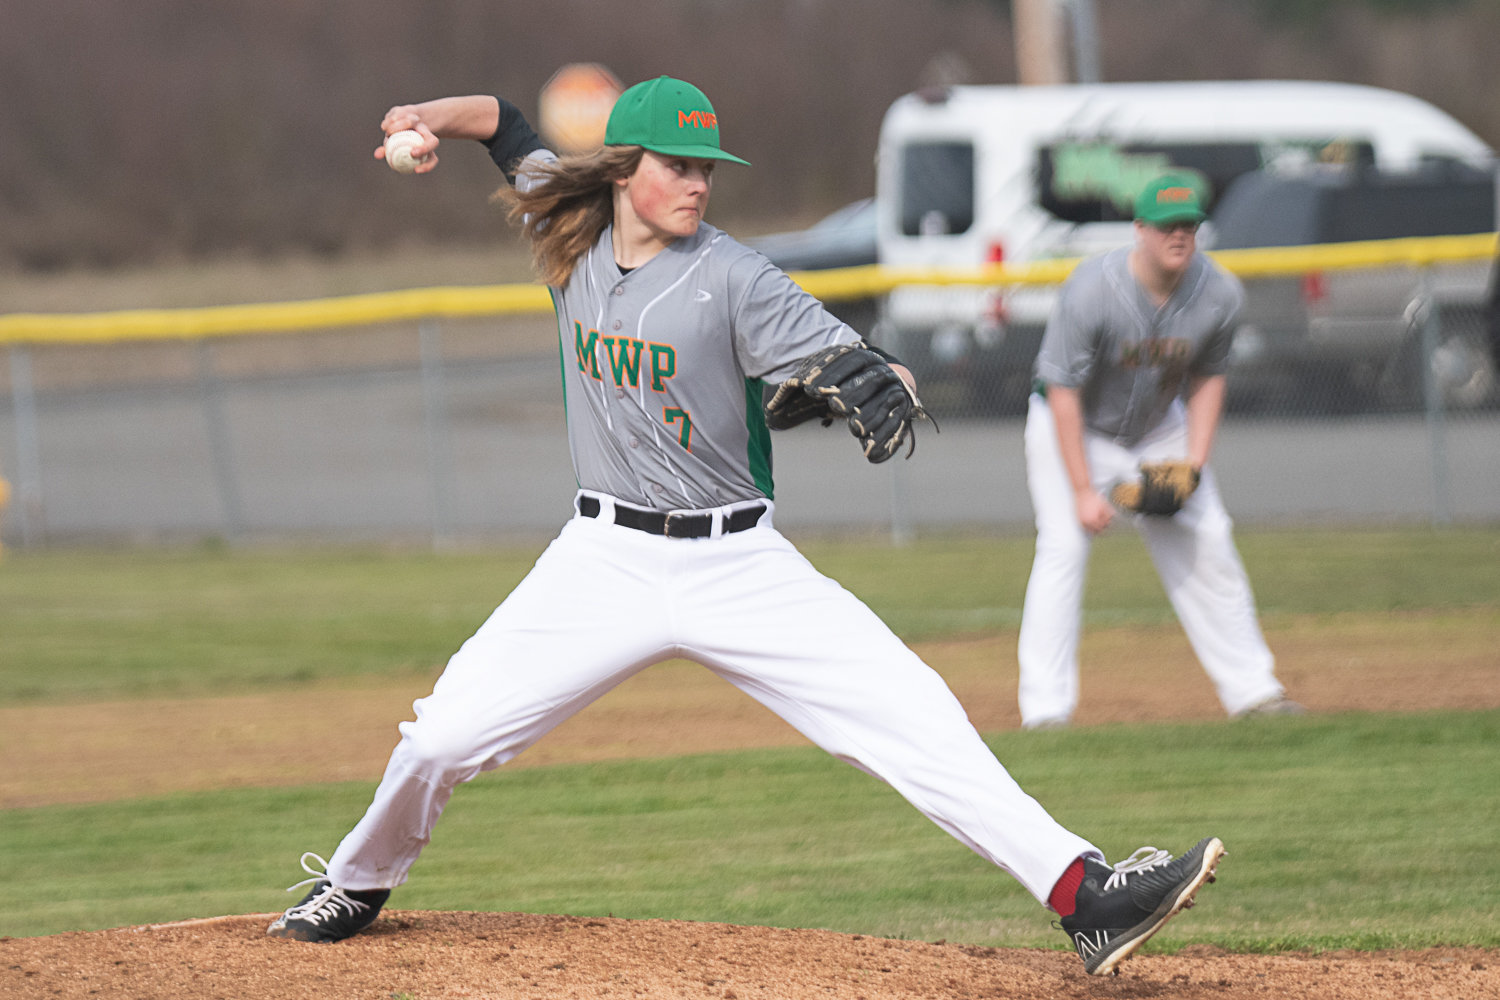 Race McKenzie throws a pitch during MWP's game against Winlock on March 27.